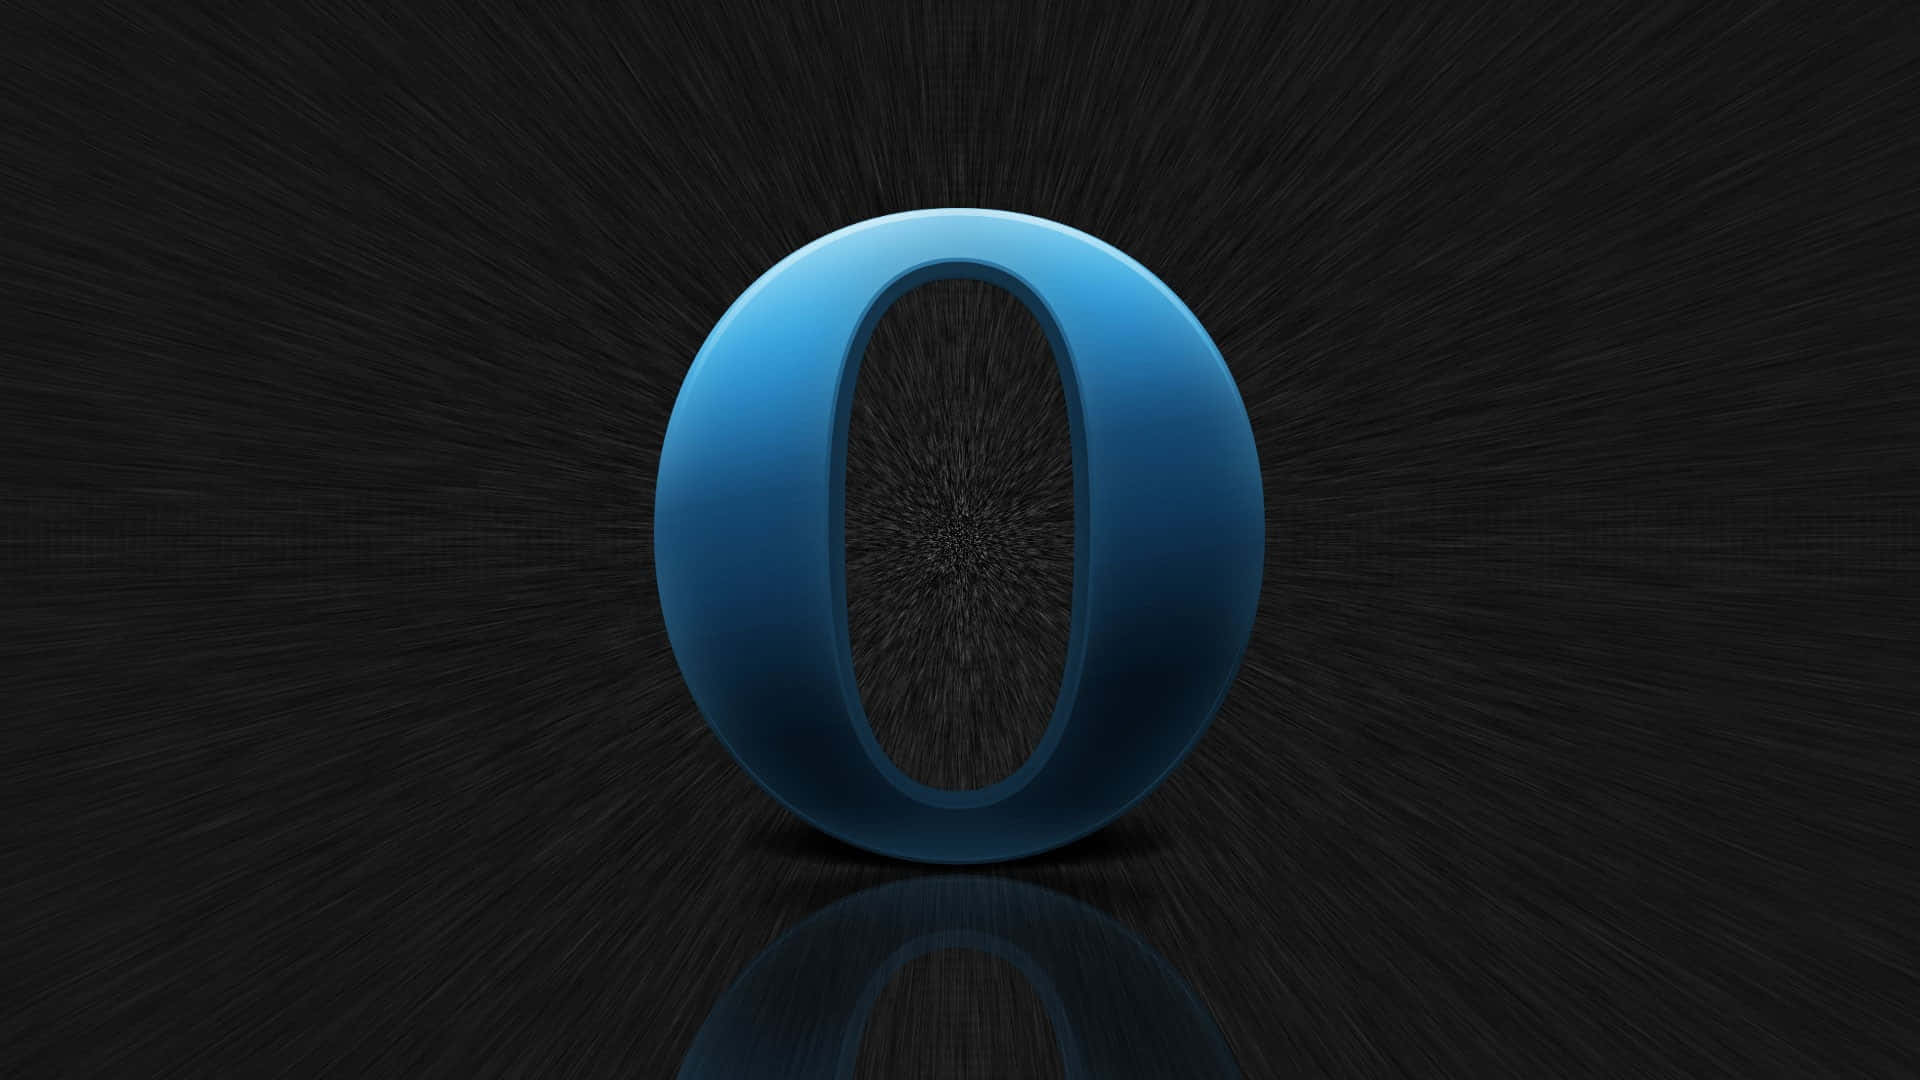 A Blue Ring With A Reflection On It Wallpaper